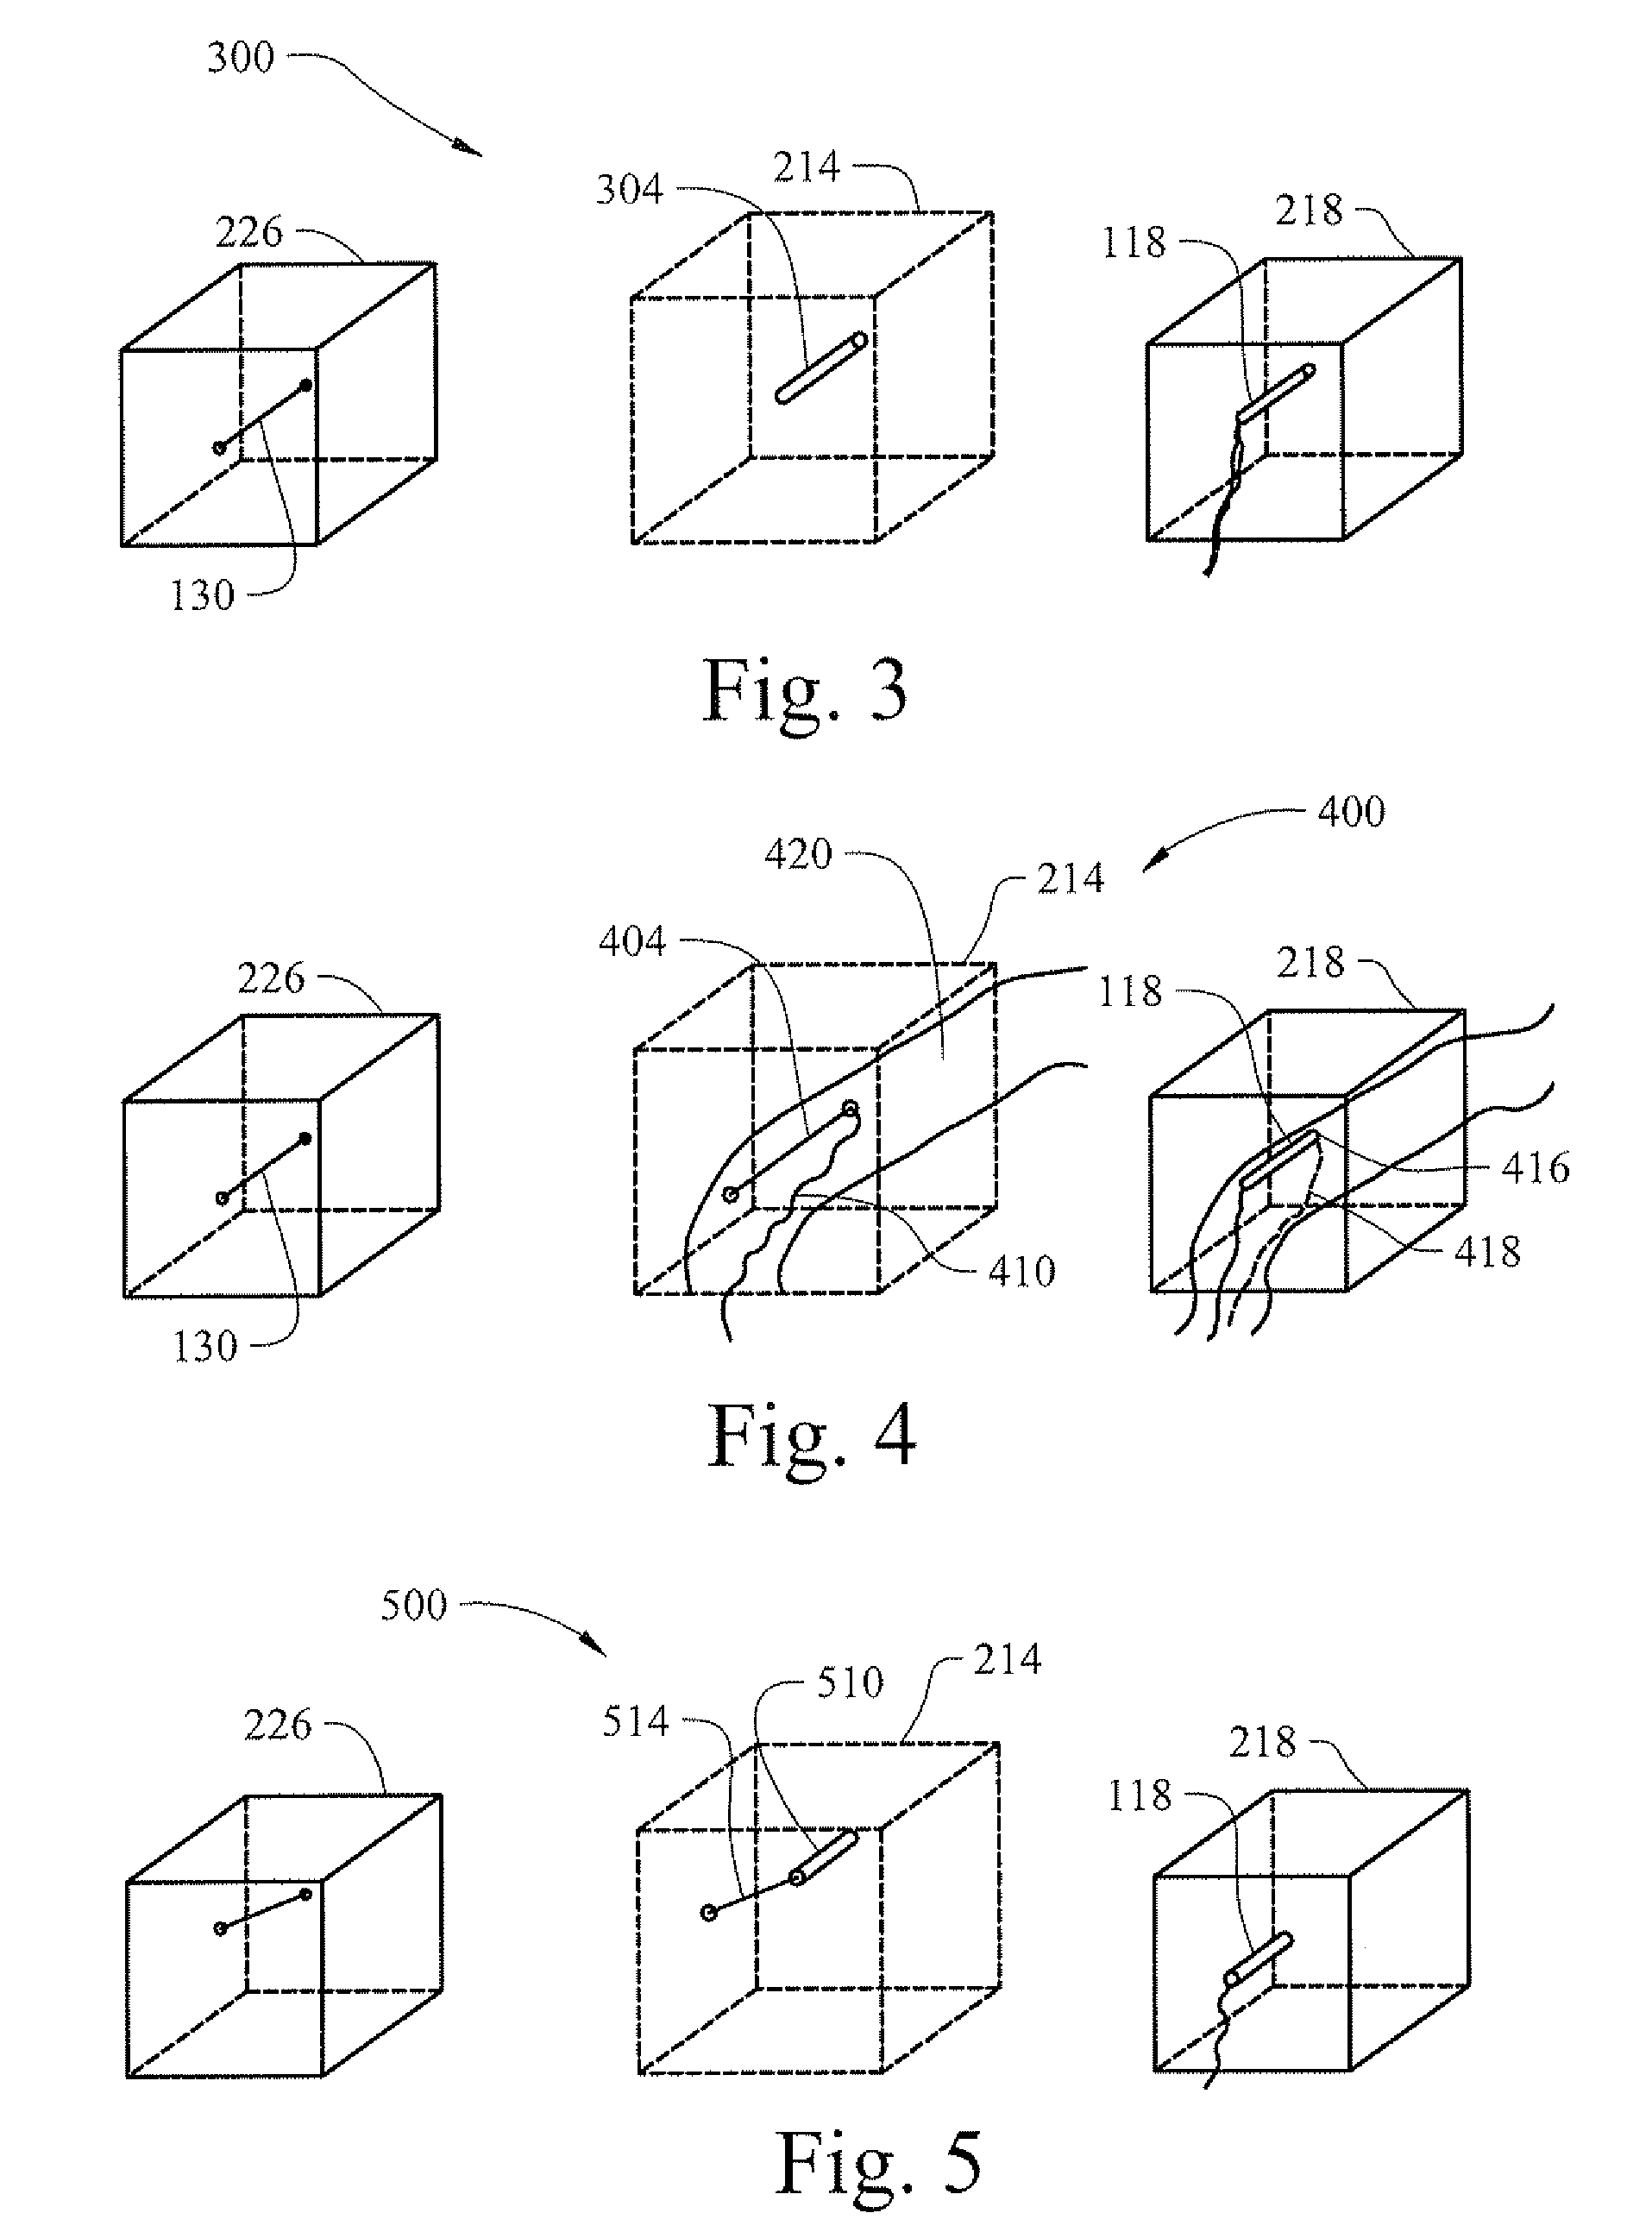 Surgical navigation using a three-dimensional user interface